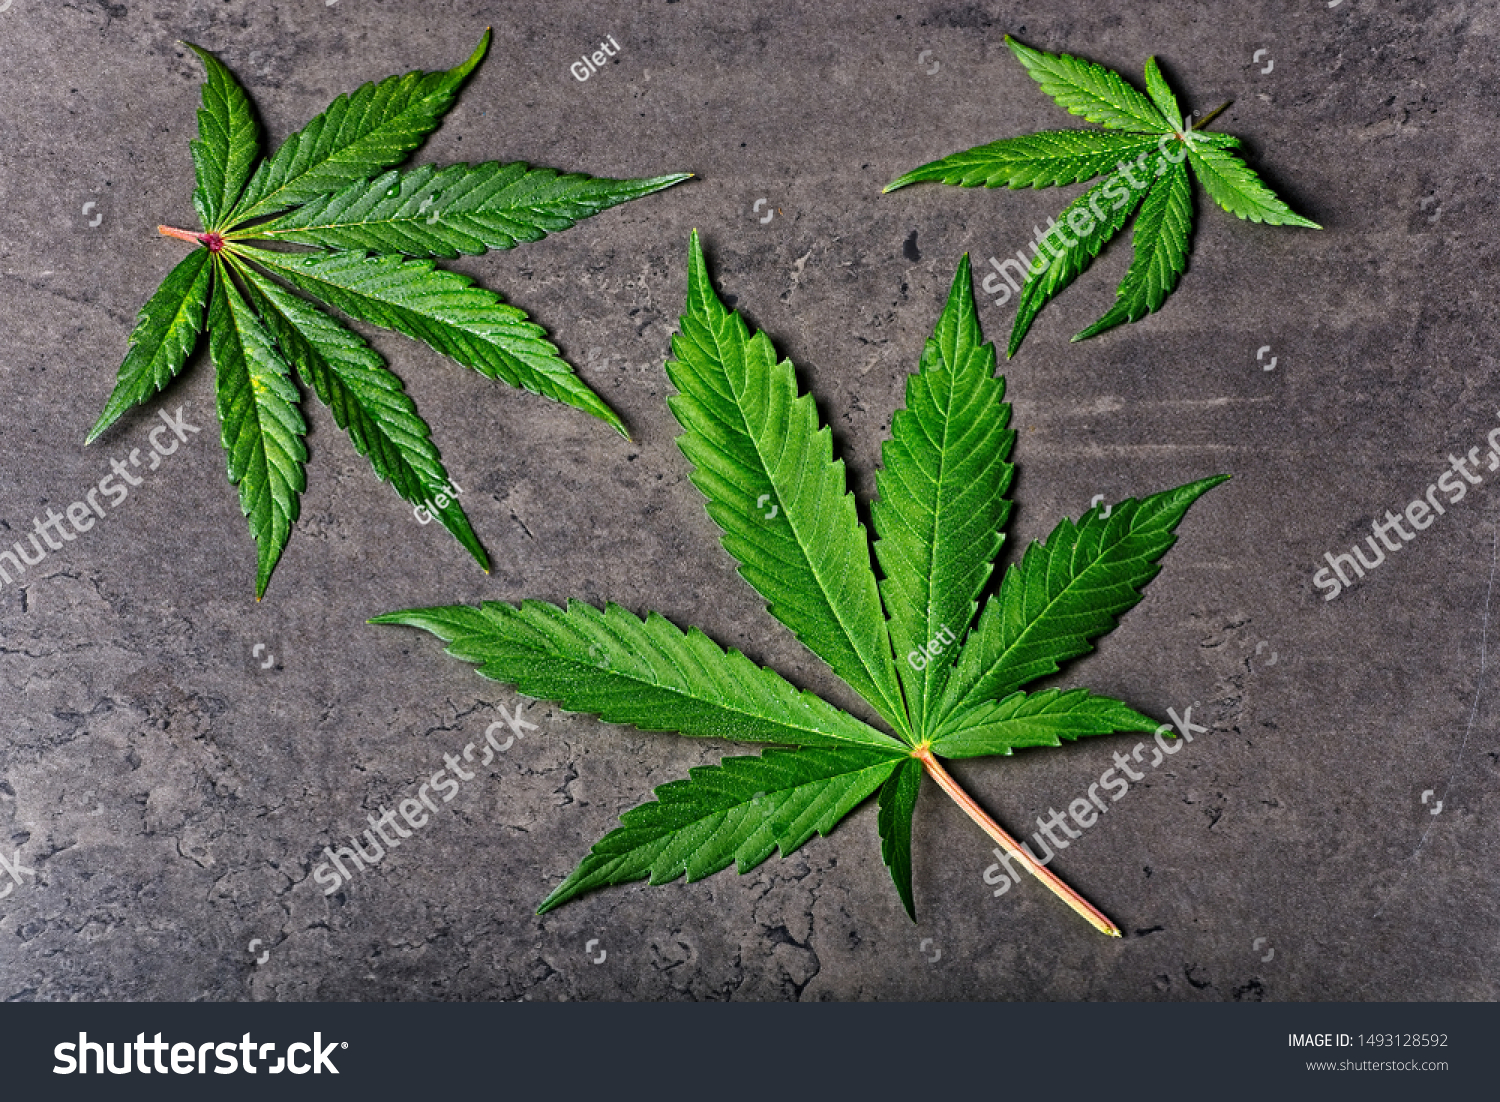 Three wet green cannabis leaves full of little drops on dry grey background. #1493128592